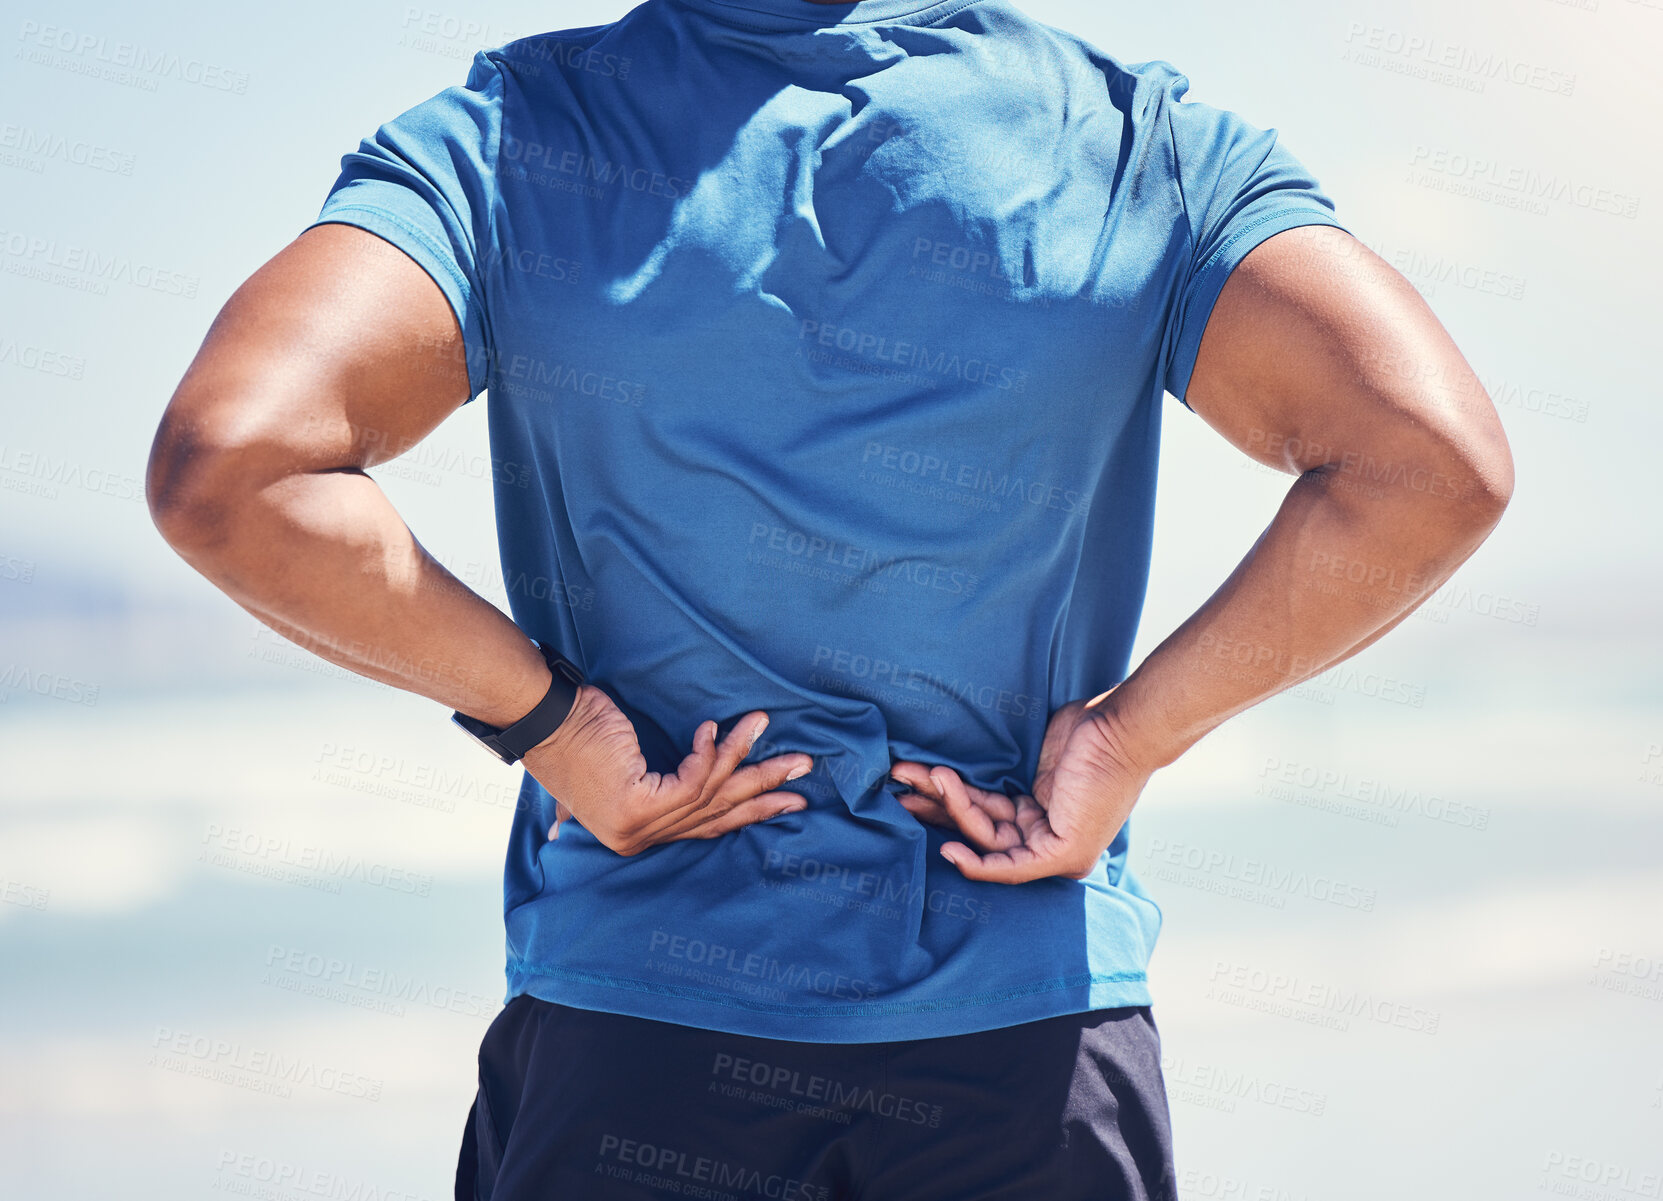 Buy stock photo Shot of a man experiencing discomfort in his back while out for a workout